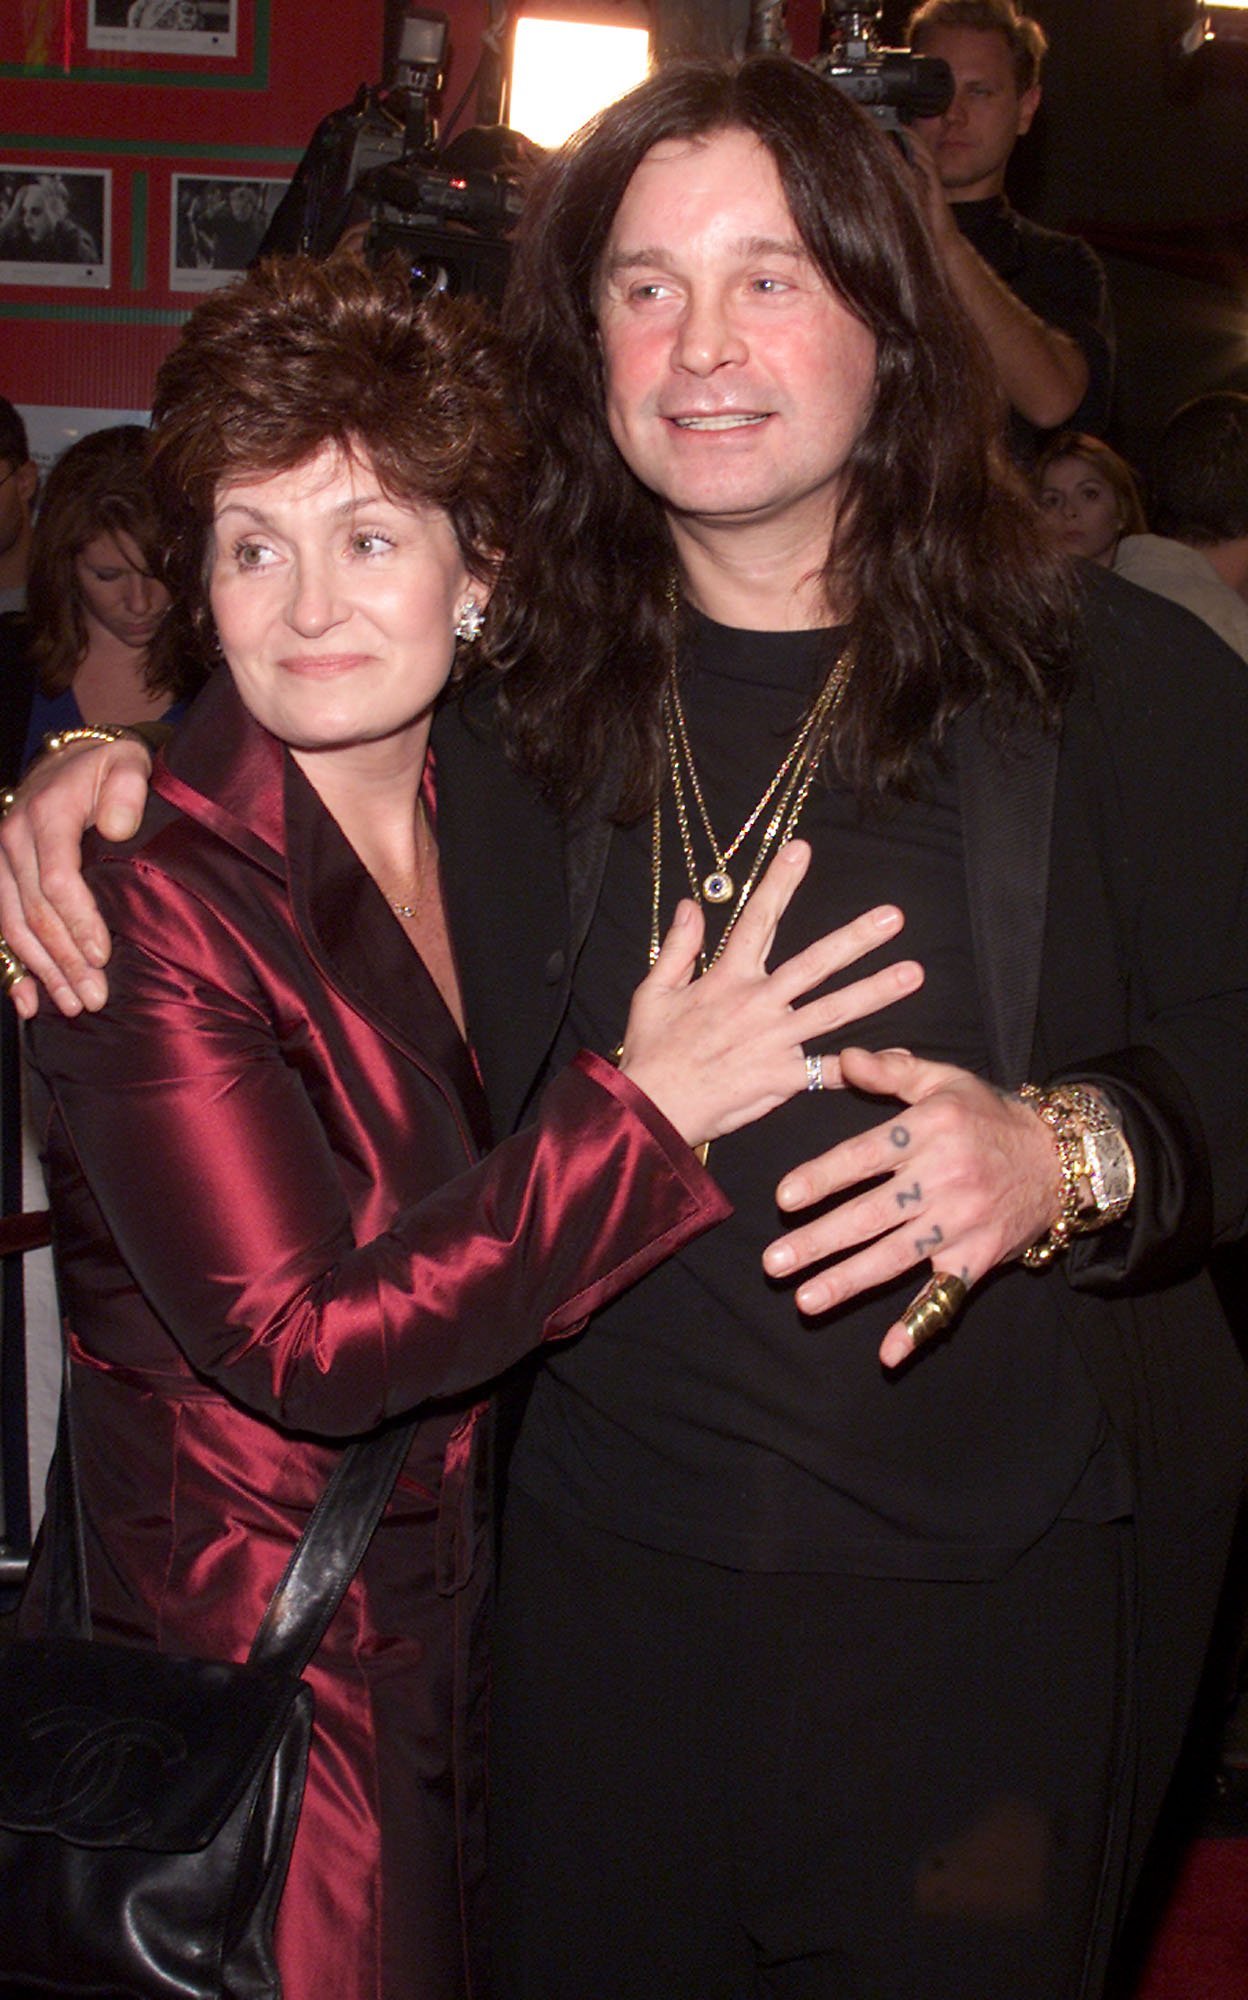 Ozzy Osbourne and his wife Sharon at the premiere of 'Little Nicky' at the Chinese Theater on February 11, 2000, in Los Angeles, Ca. | Source: Getty Images.